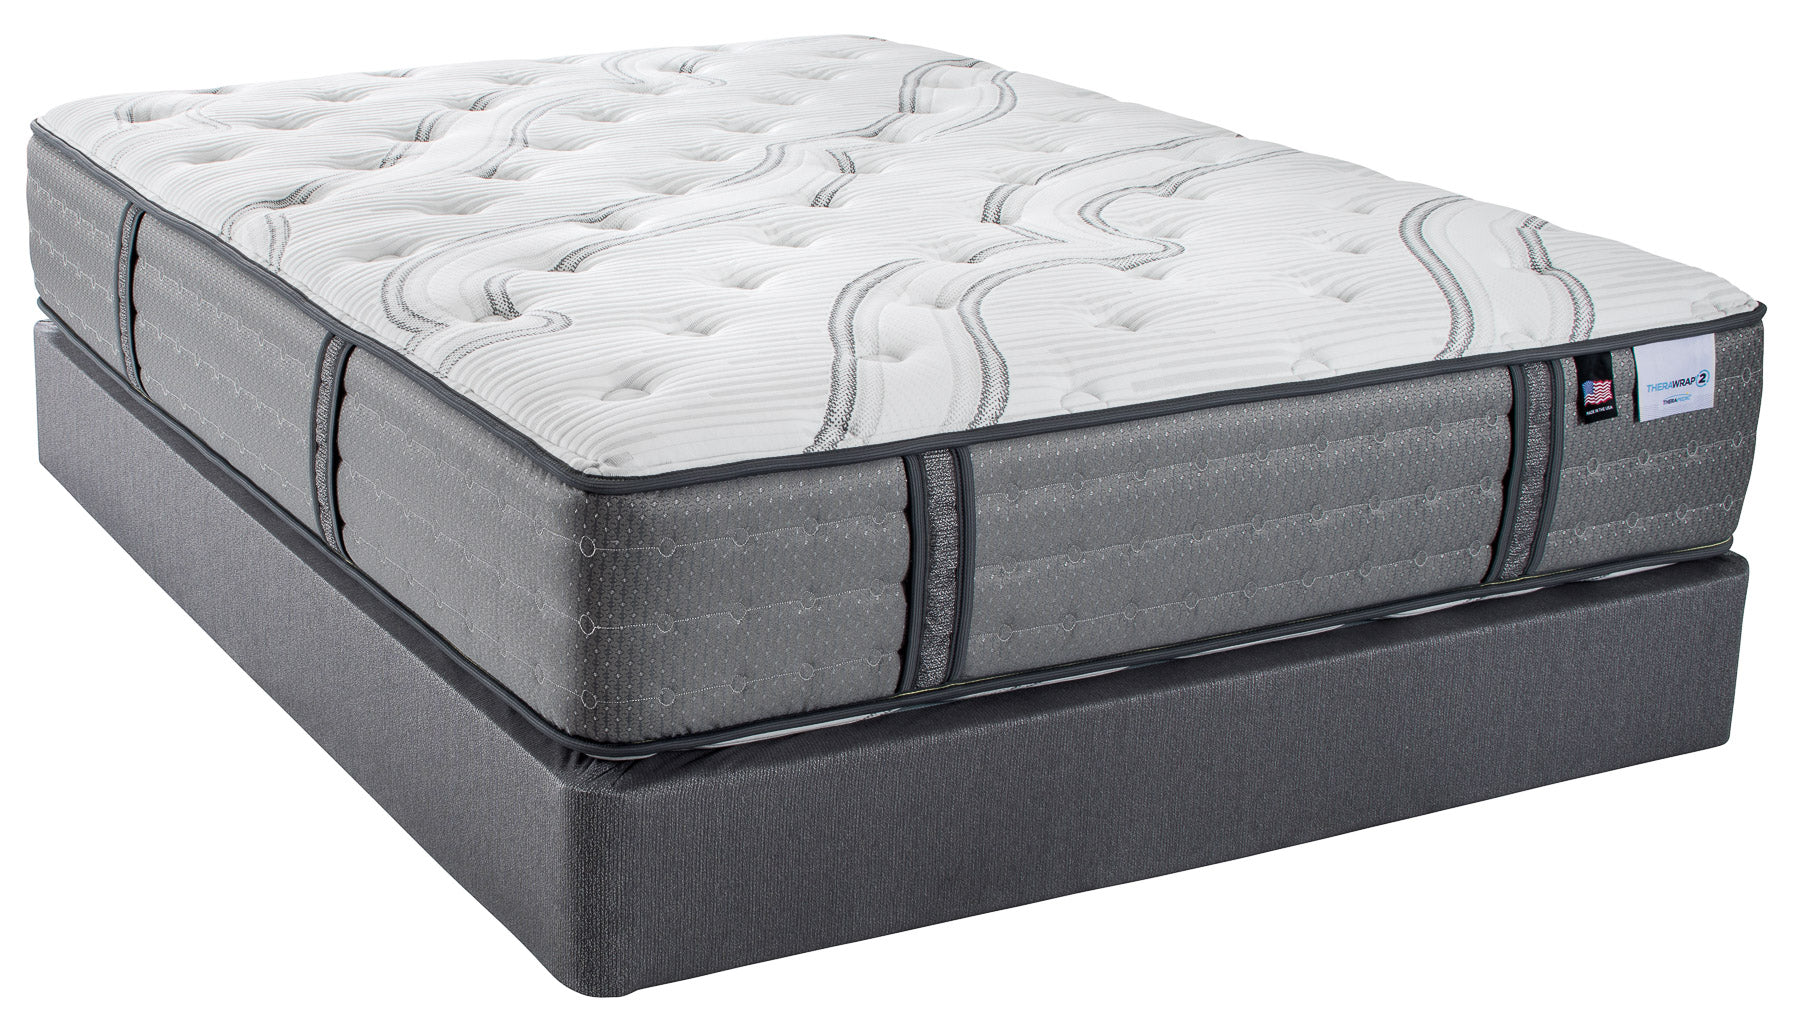 spring mattress you can flip over